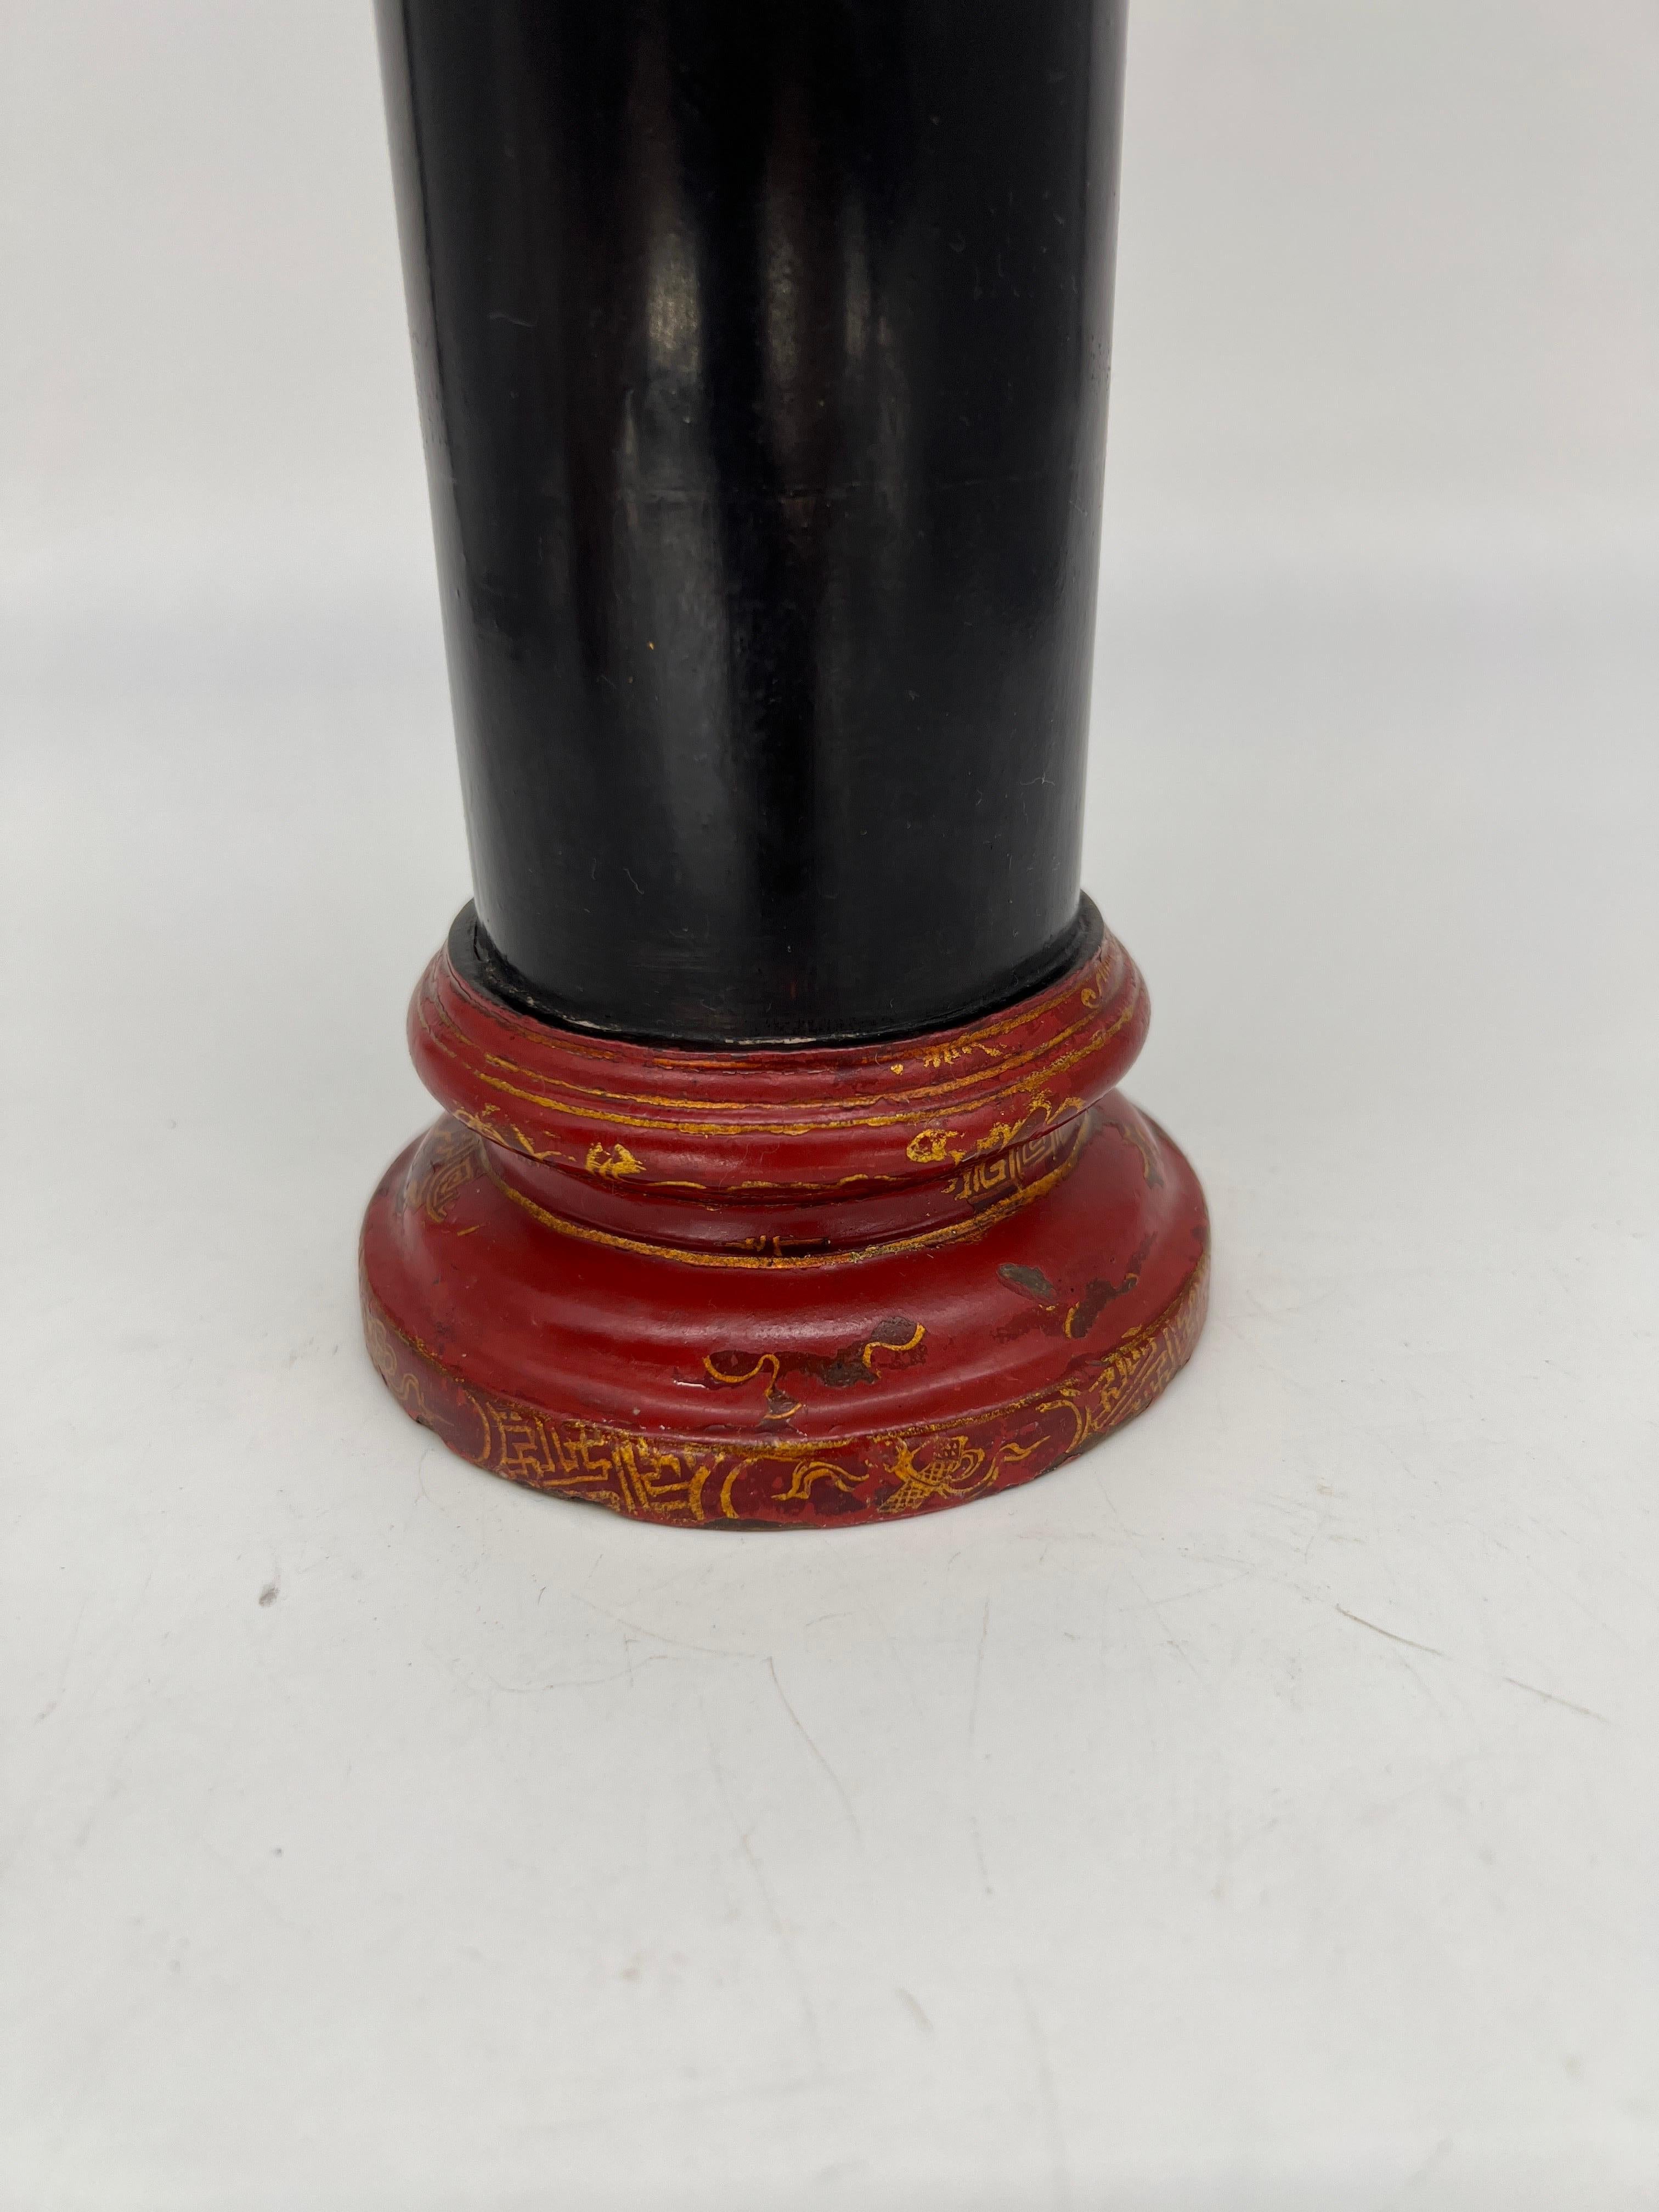 Vintage Japanese Lacquerware Cylindrical Fireplace Matchstrike Box For Sale 1